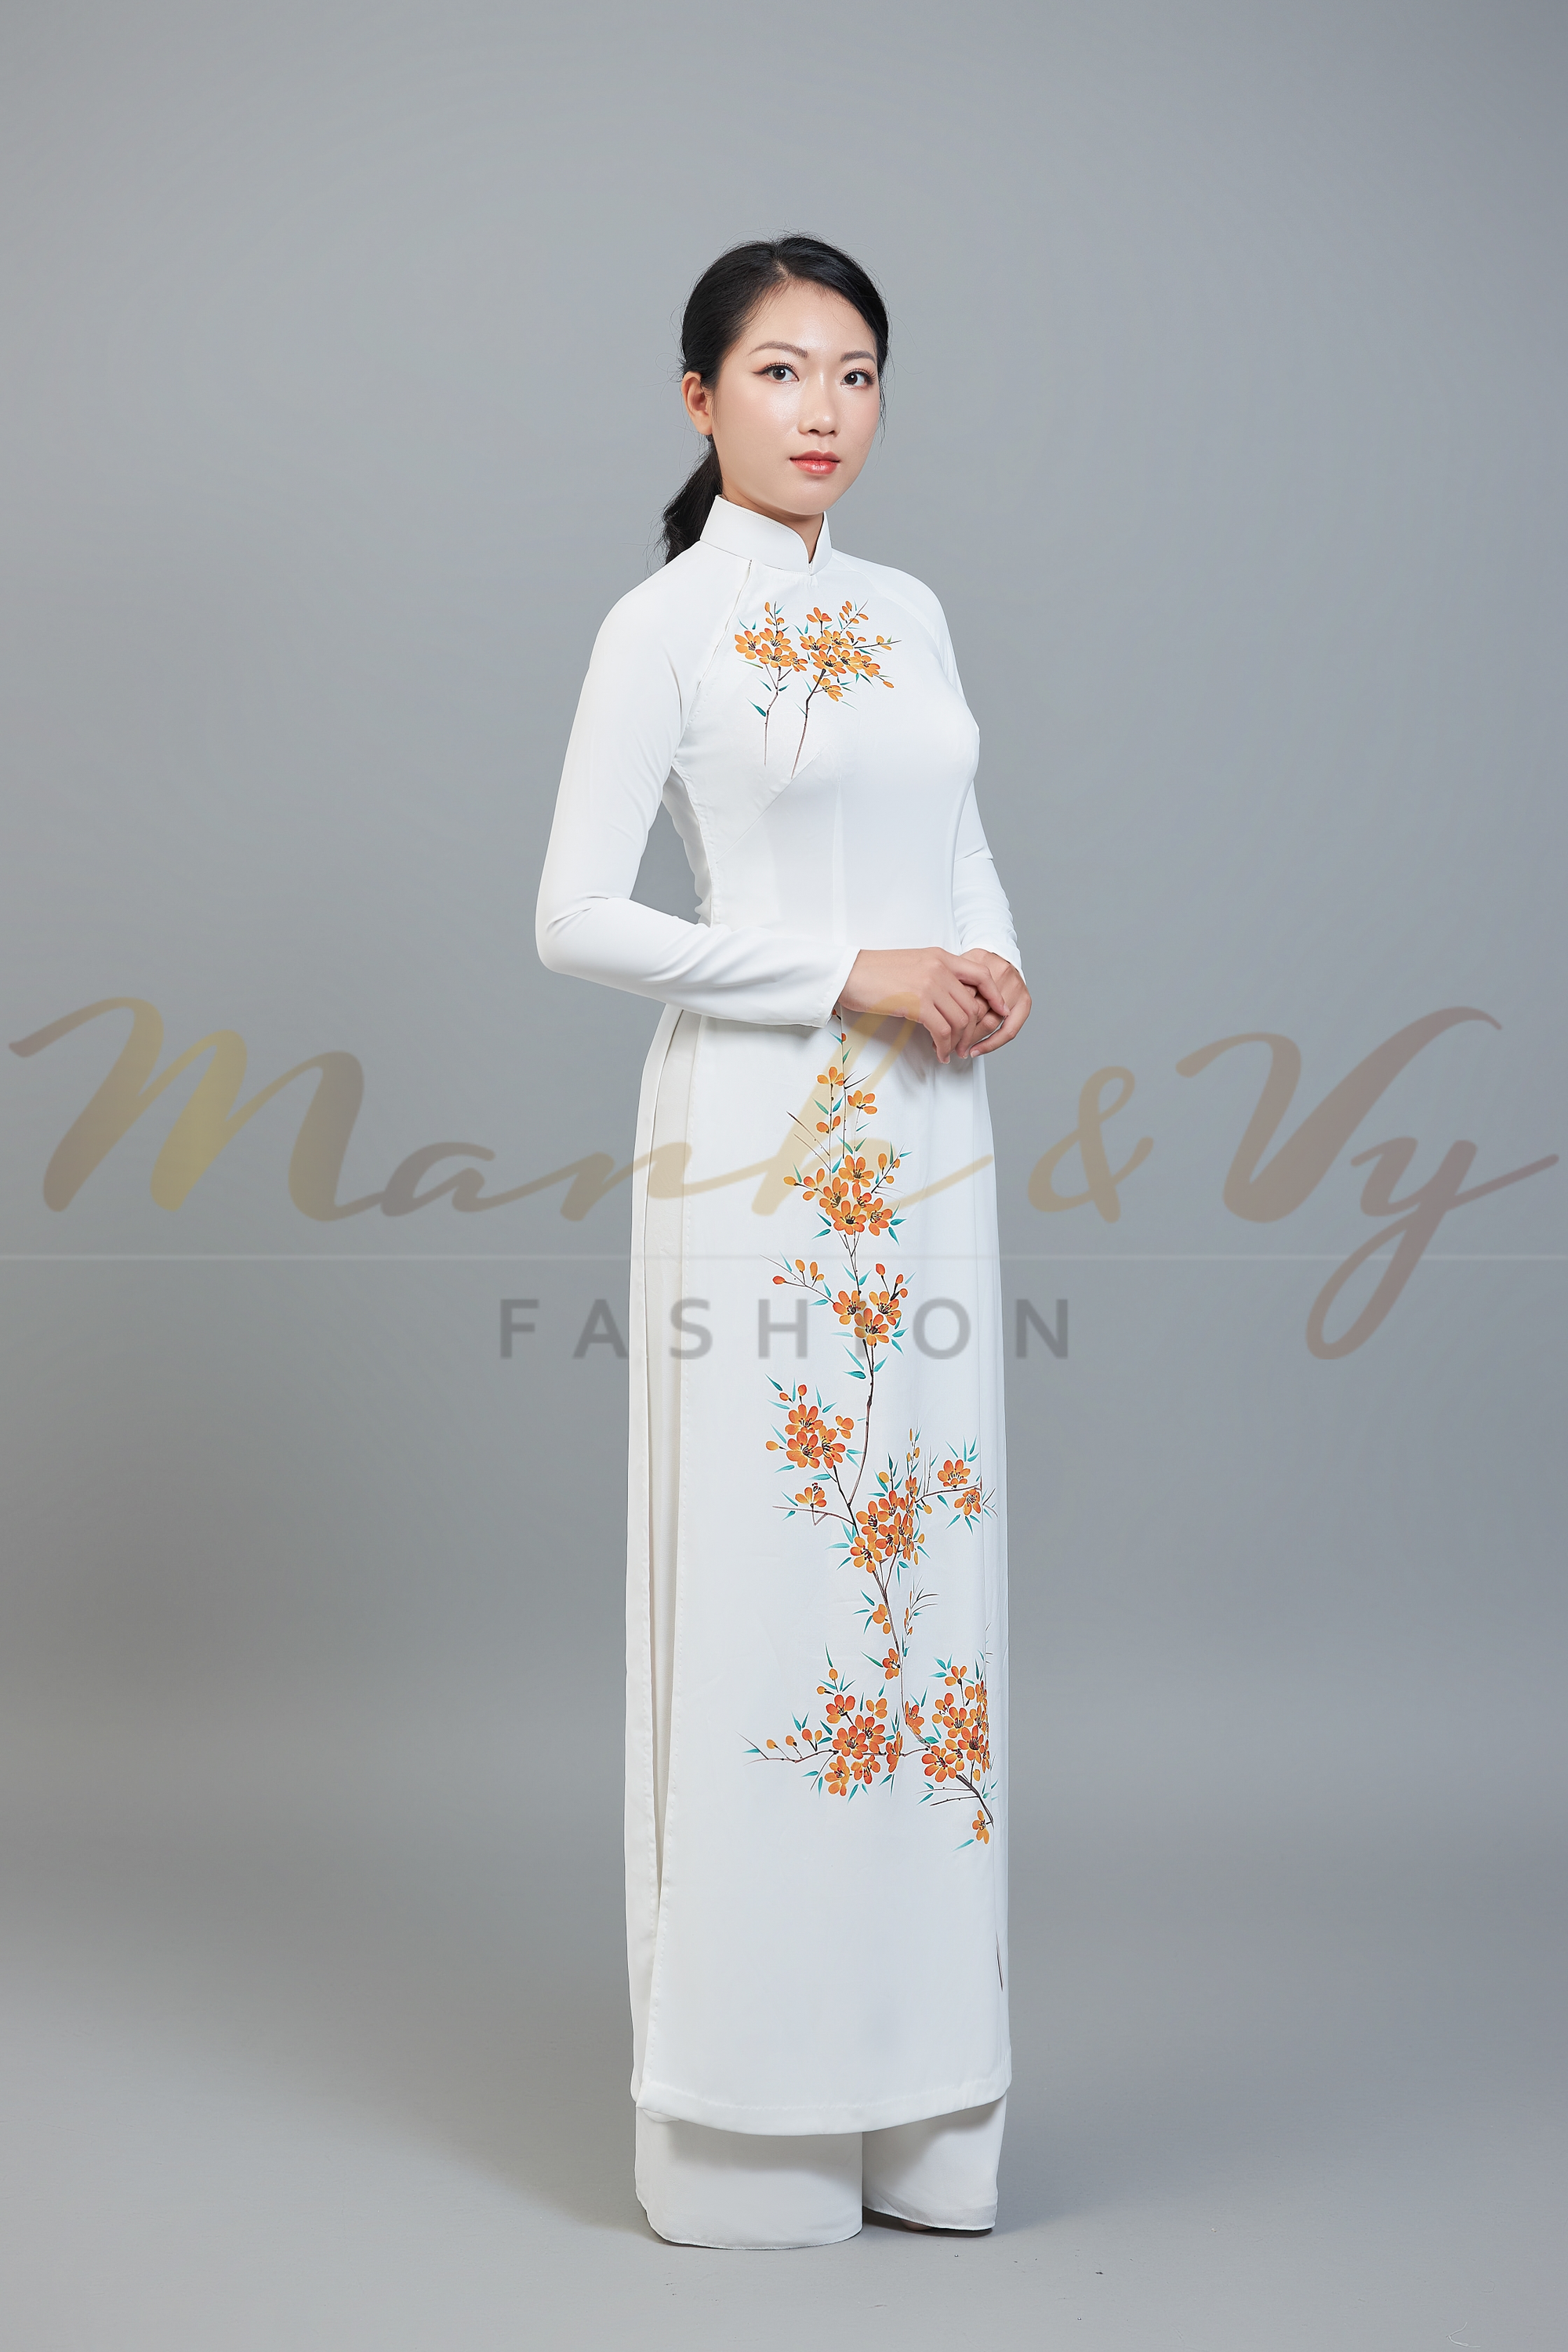 Custom made ao dai. Unique, hand-painted, floral motif on stunning, white fabric.